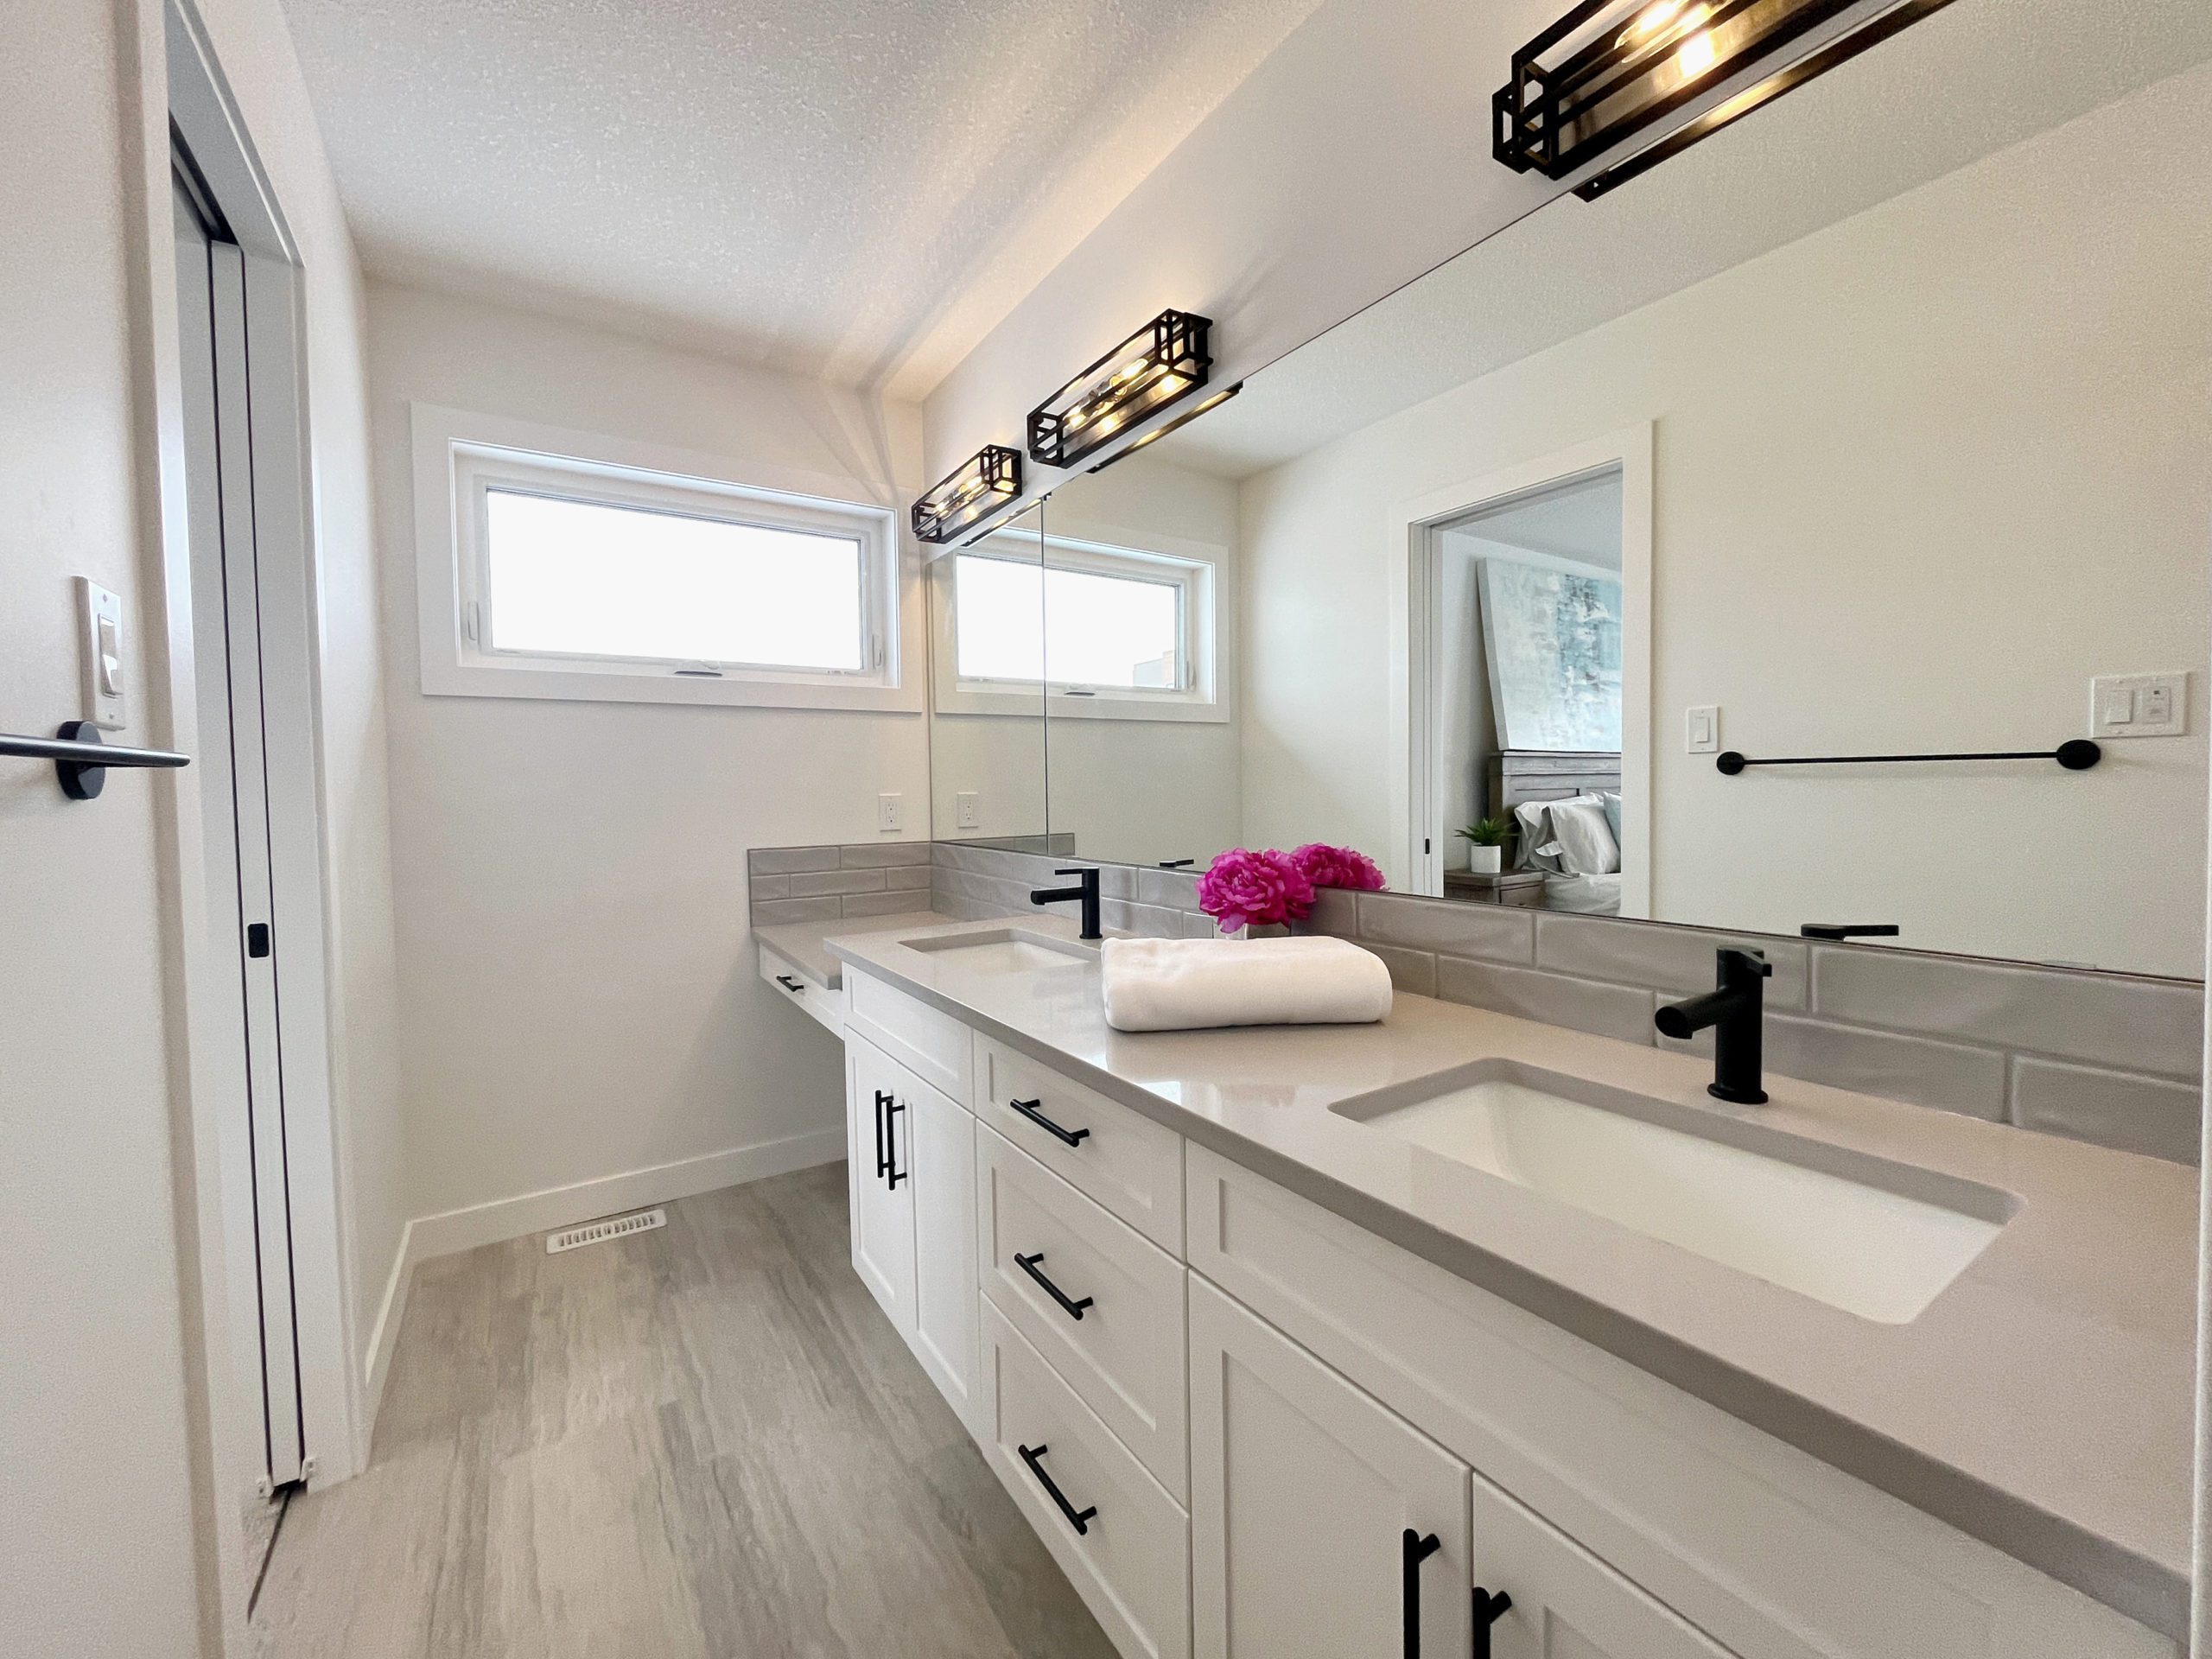 The primary ensuite bathroom with double sinks, makeup counter and mirrors.